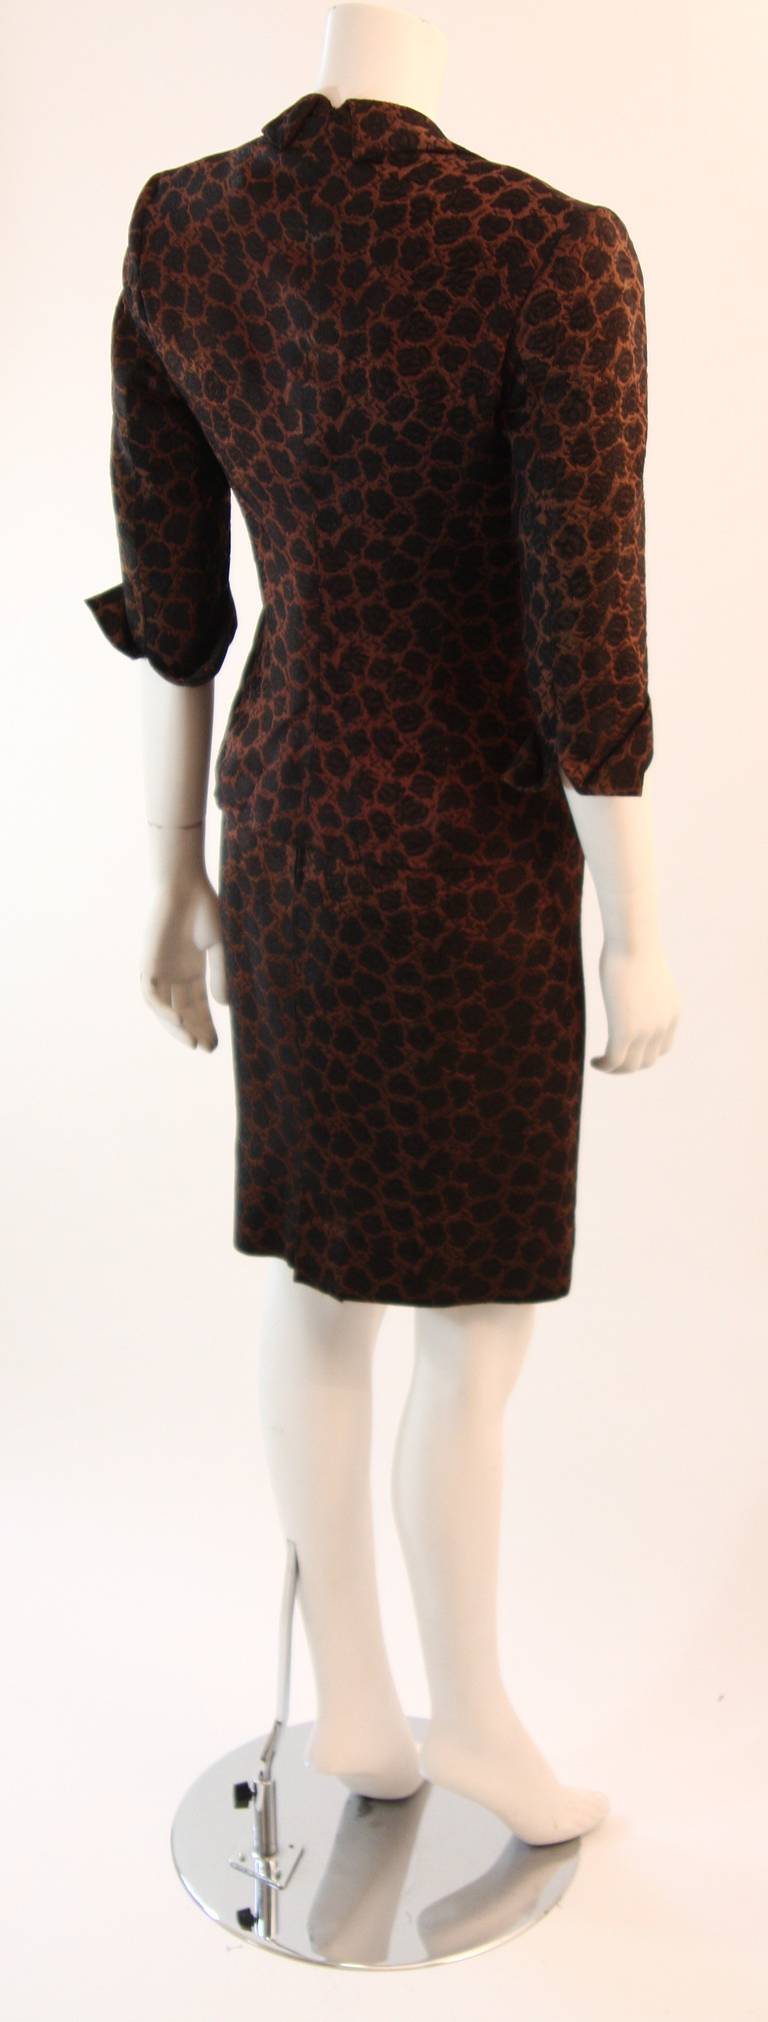 Stunning Mingolini Guggenheim Brown and Black Beaded Couture Dress Set For Sale 4